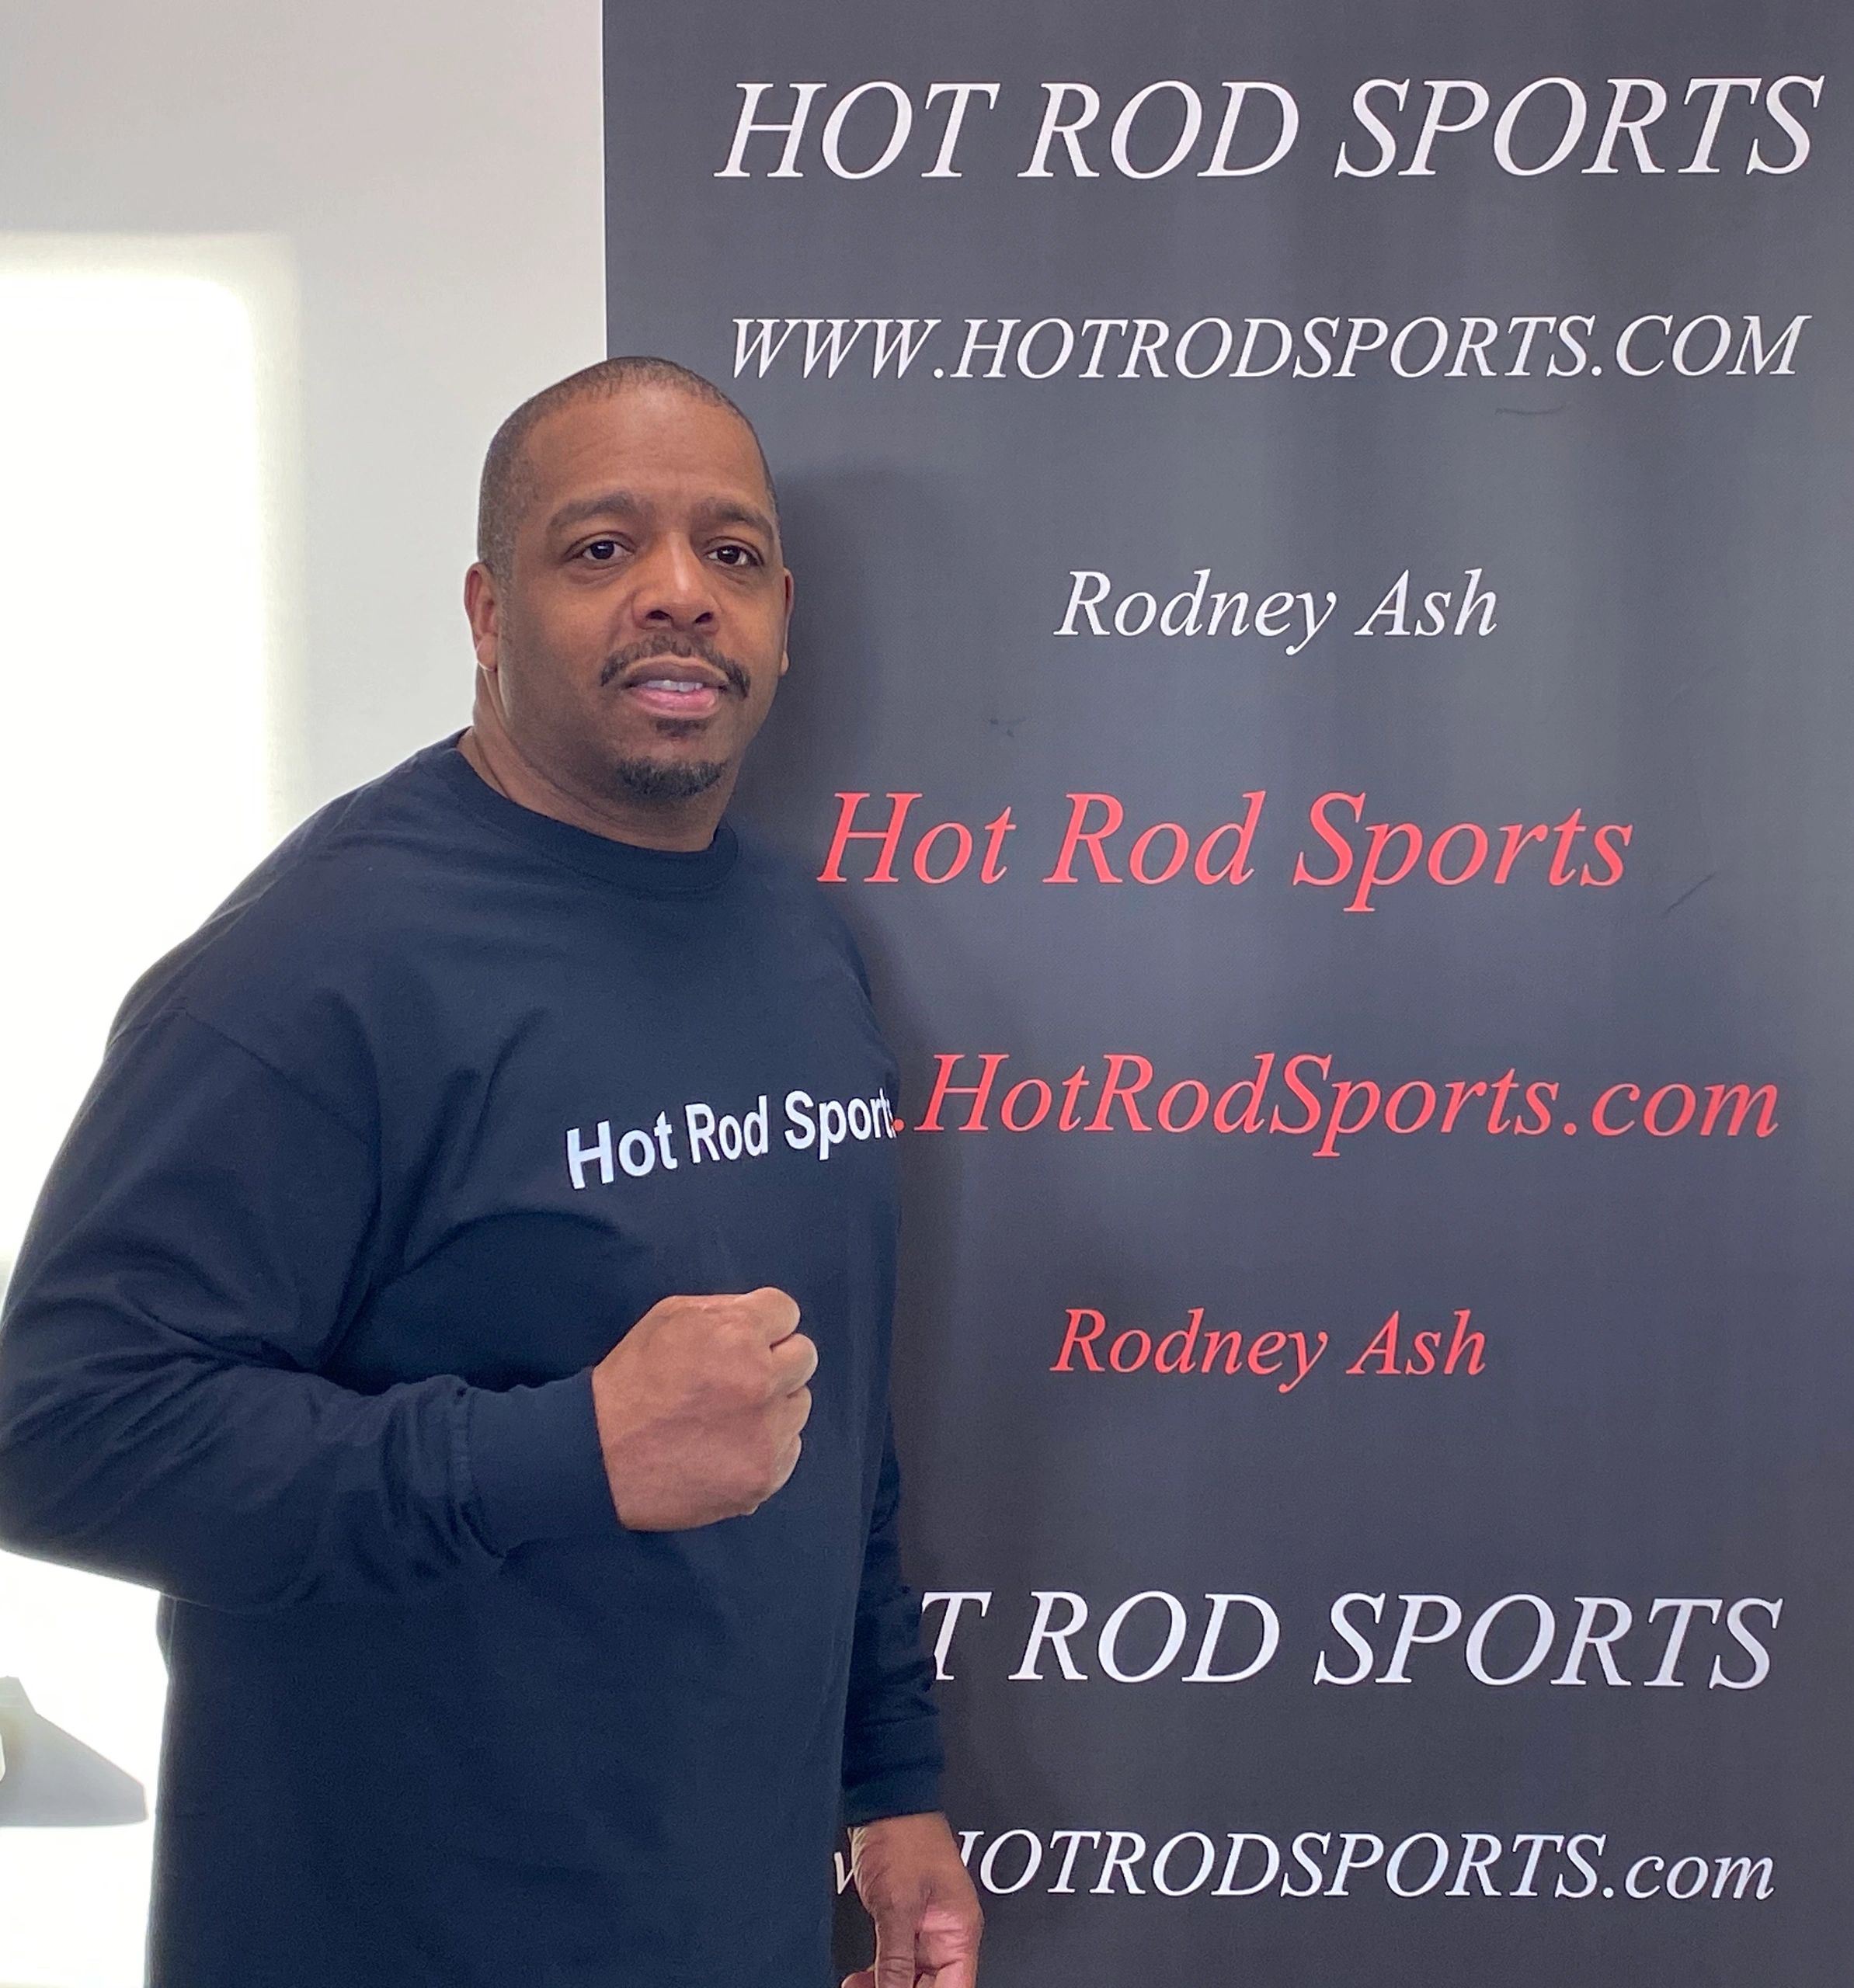 Rodney Ash is the founder of Hot Rod Sports and Hot Rod Entertainment.